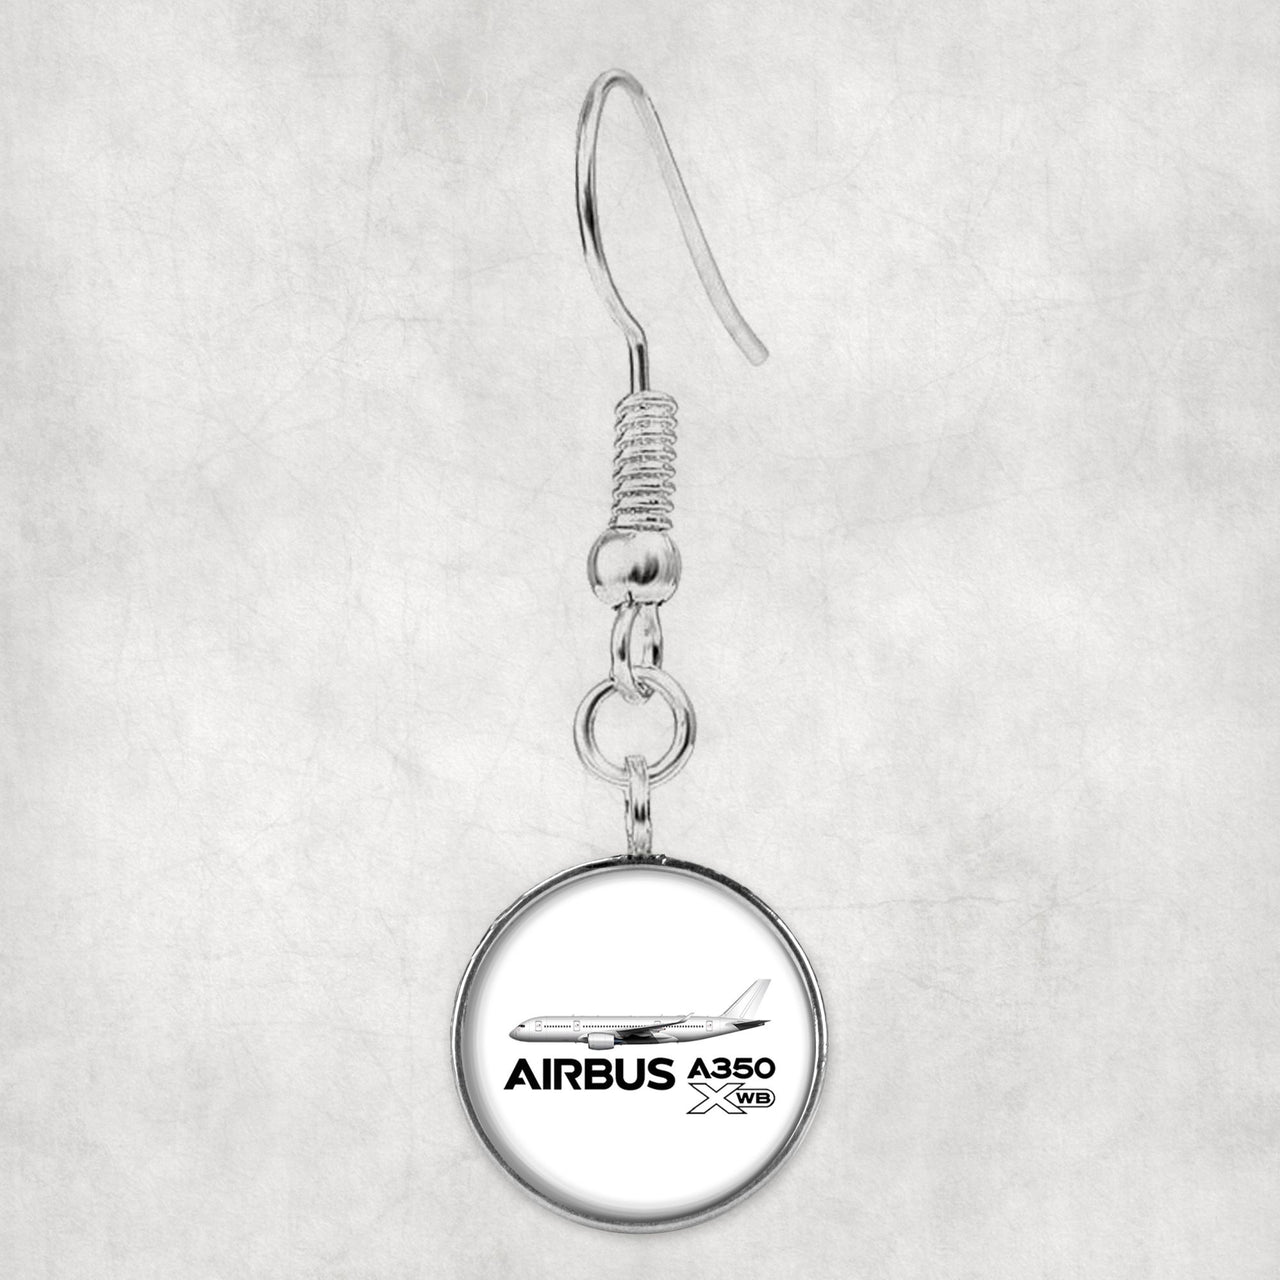 The Airbus A350 WXB Designed Earrings